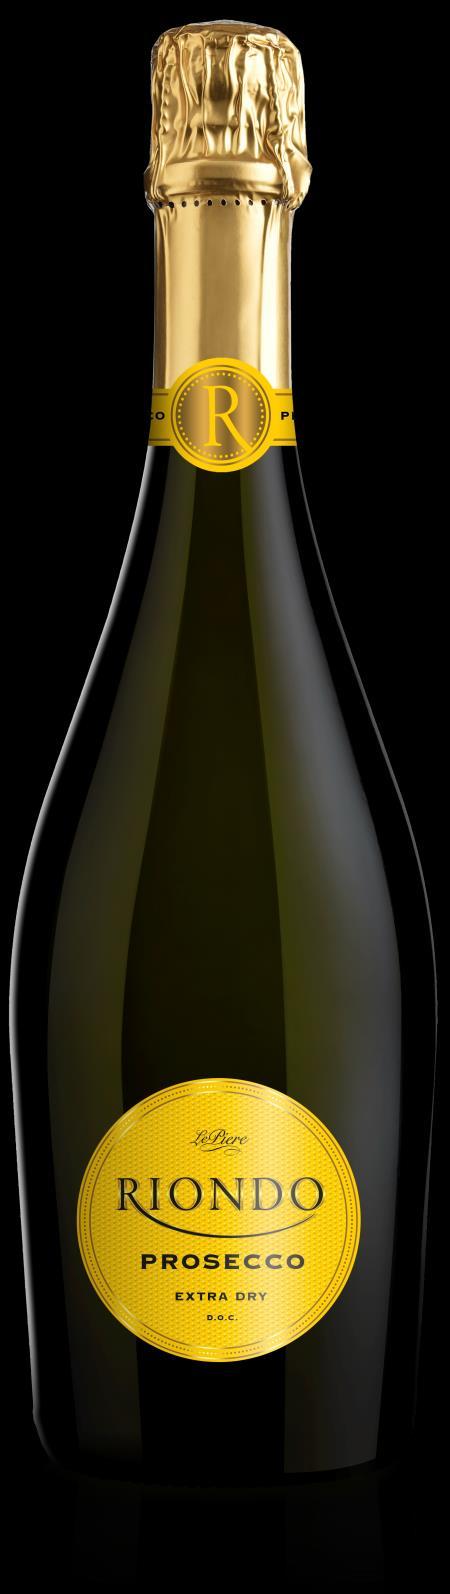 Le Piere Prosecco Sparkling, Extra Dry 11% vol 14 g/liter 750 ml 7-8 C Cold maceration of the grapes, natural fermentation at a controlled temperature of 16 C.